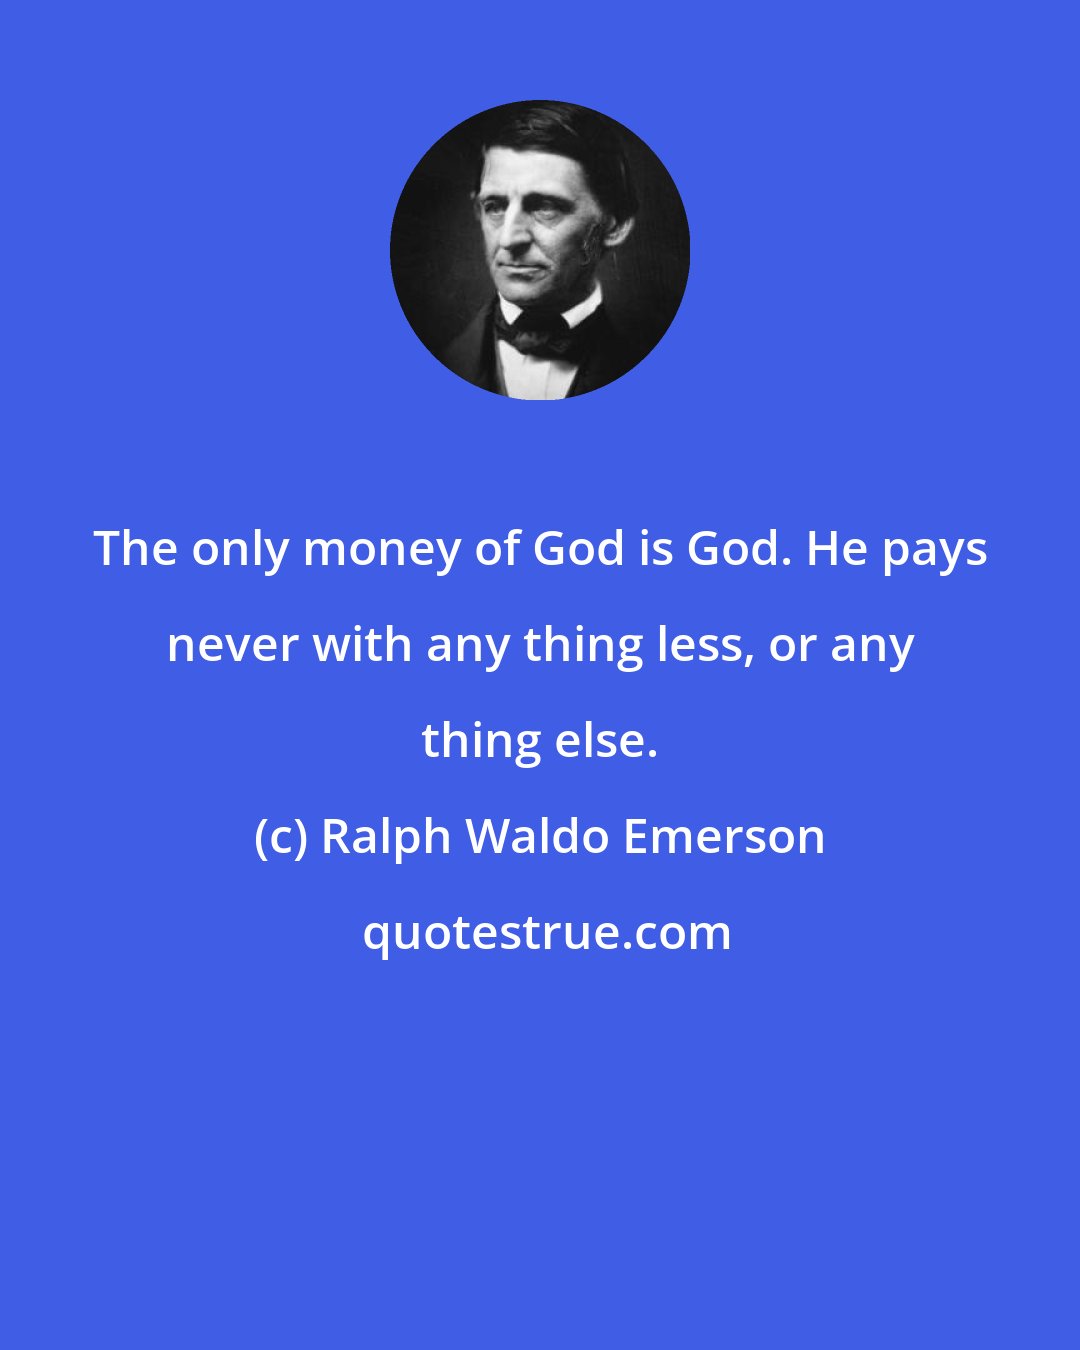 Ralph Waldo Emerson: The only money of God is God. He pays never with any thing less, or any thing else.